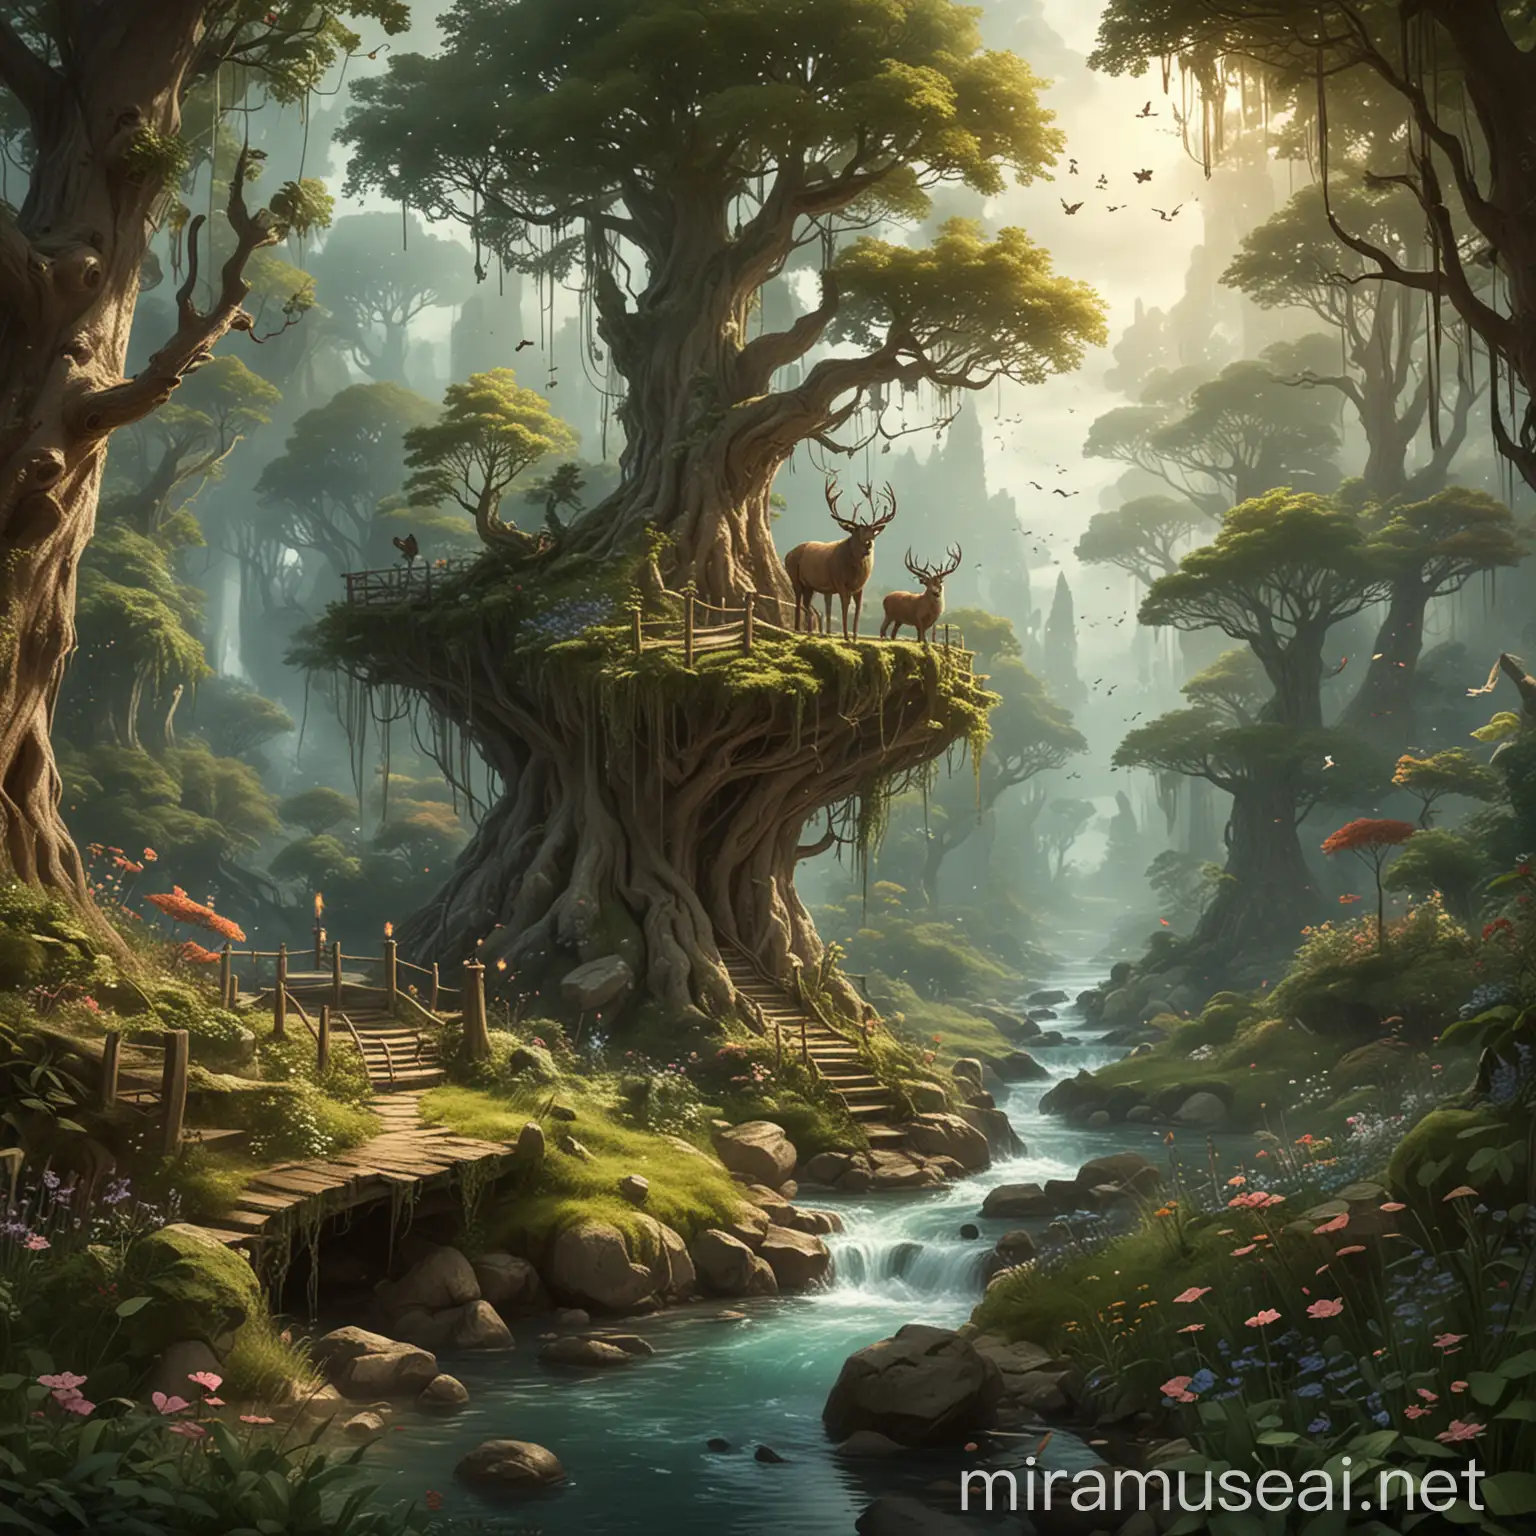 Fantastical Landscapes Inspired by Romantic Music